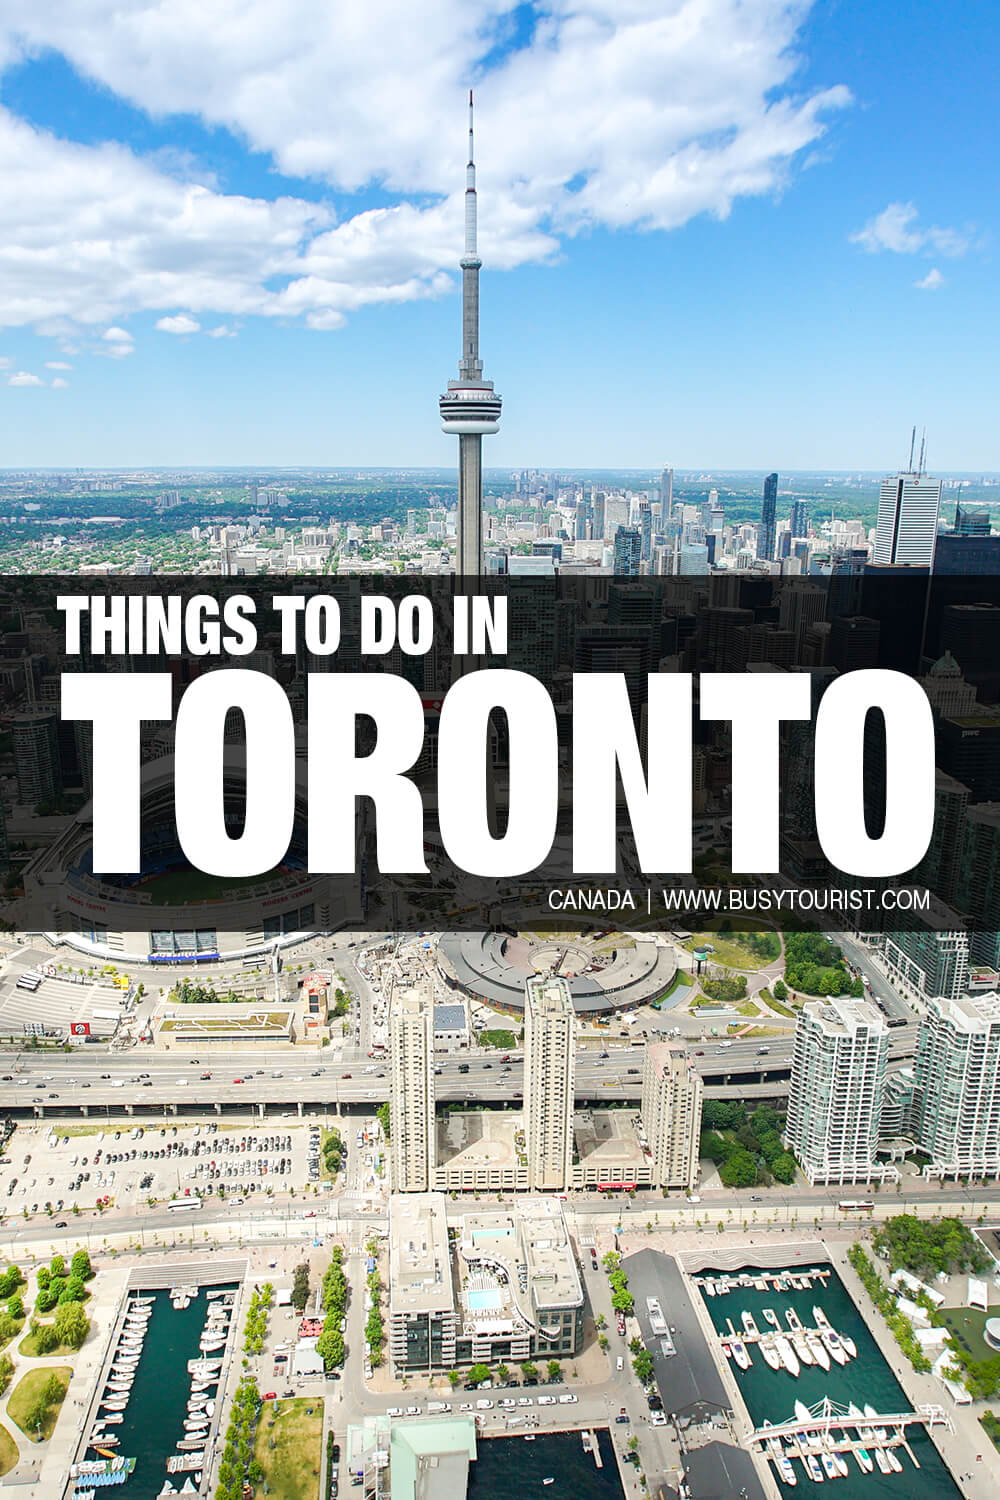 35 Best & Fun Things To Do In Toronto (Canada) - Attractions & Activities